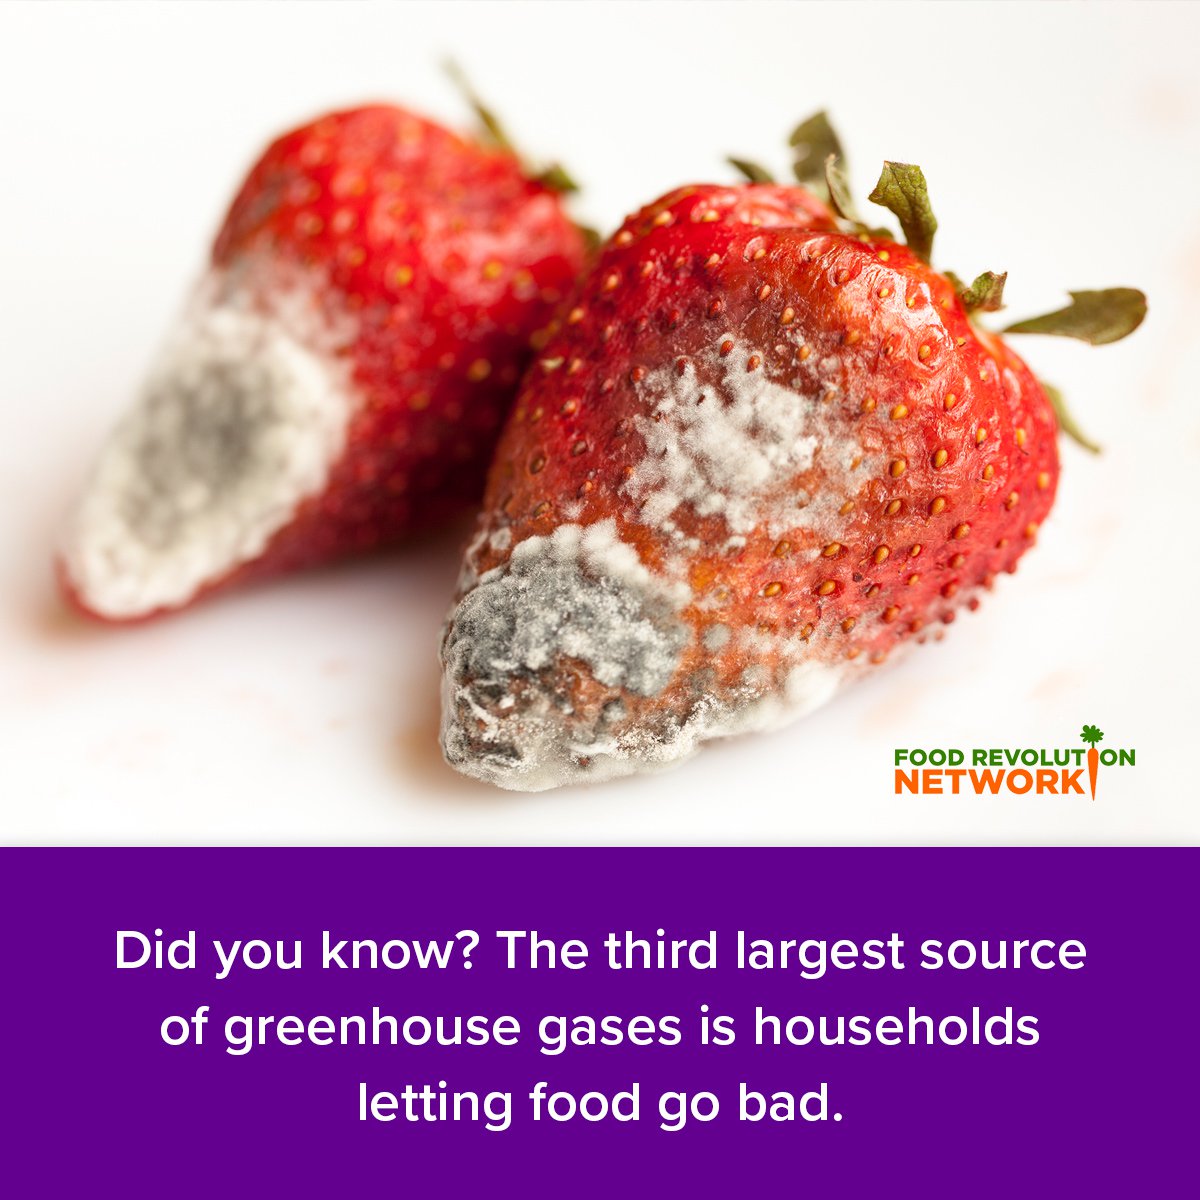 Did you know? The third largest source of greenhouse gases is households letting food go bad.